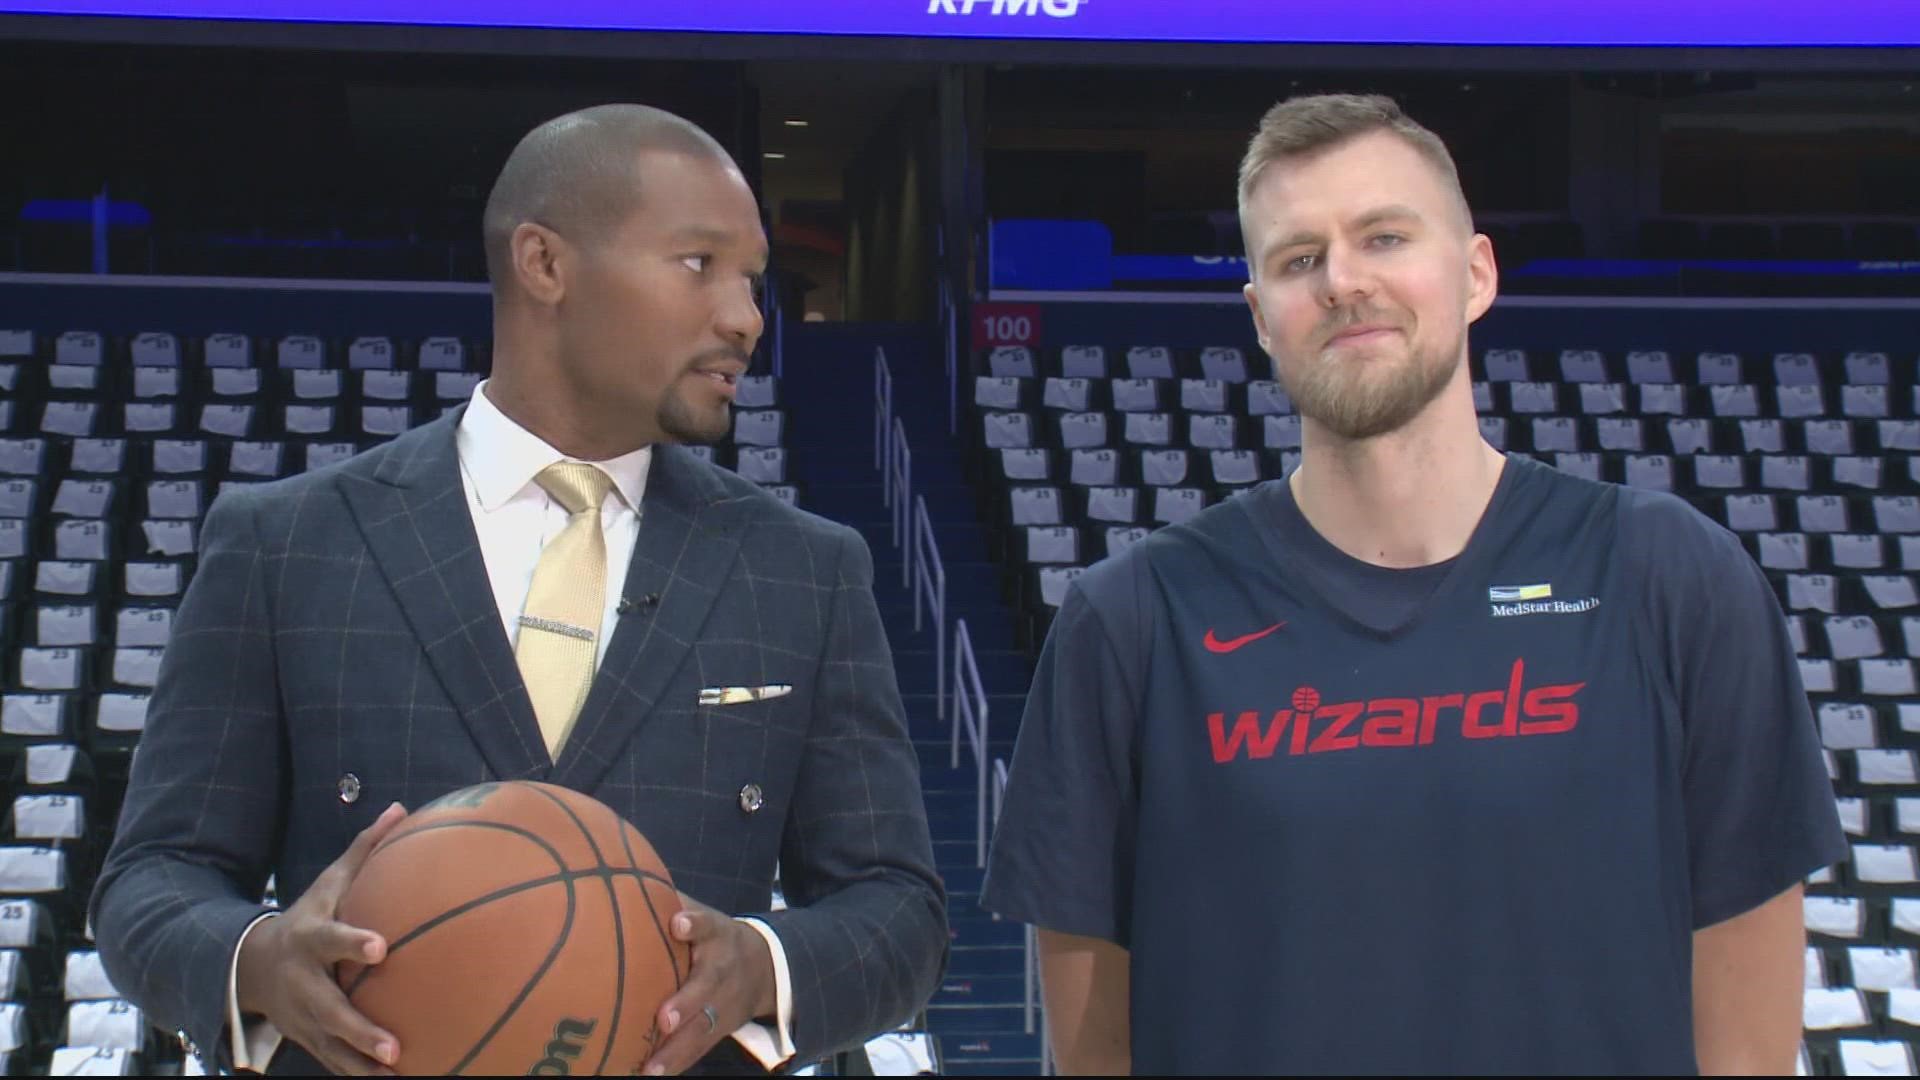 Wizards player discusses life as a 7-footer